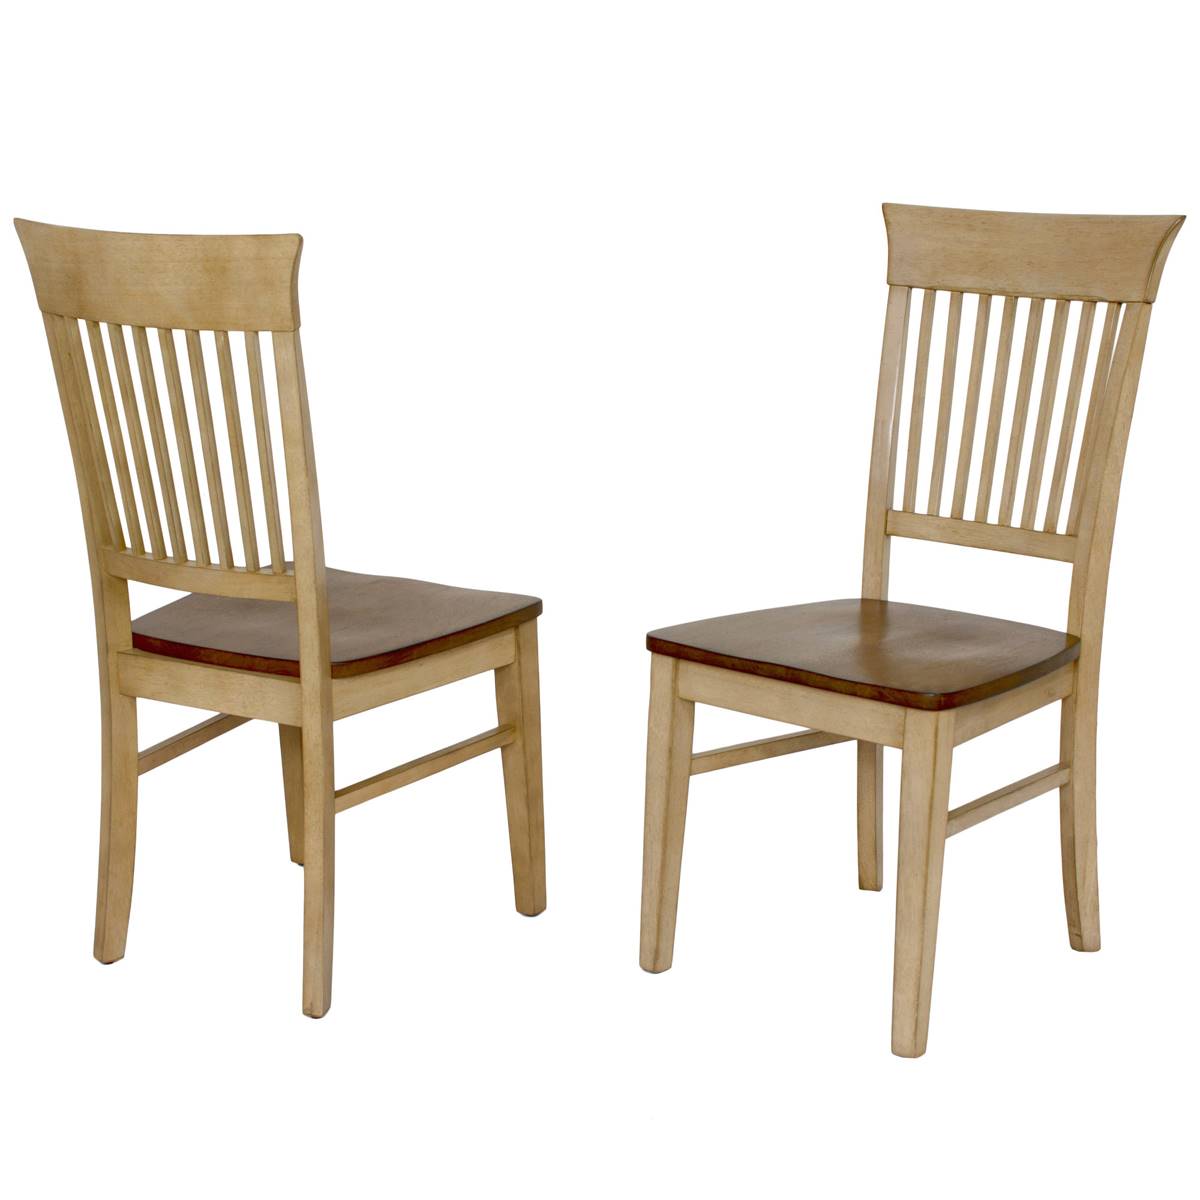 Besthom Simply Brook Distressed Side Chairs - Set Of 2